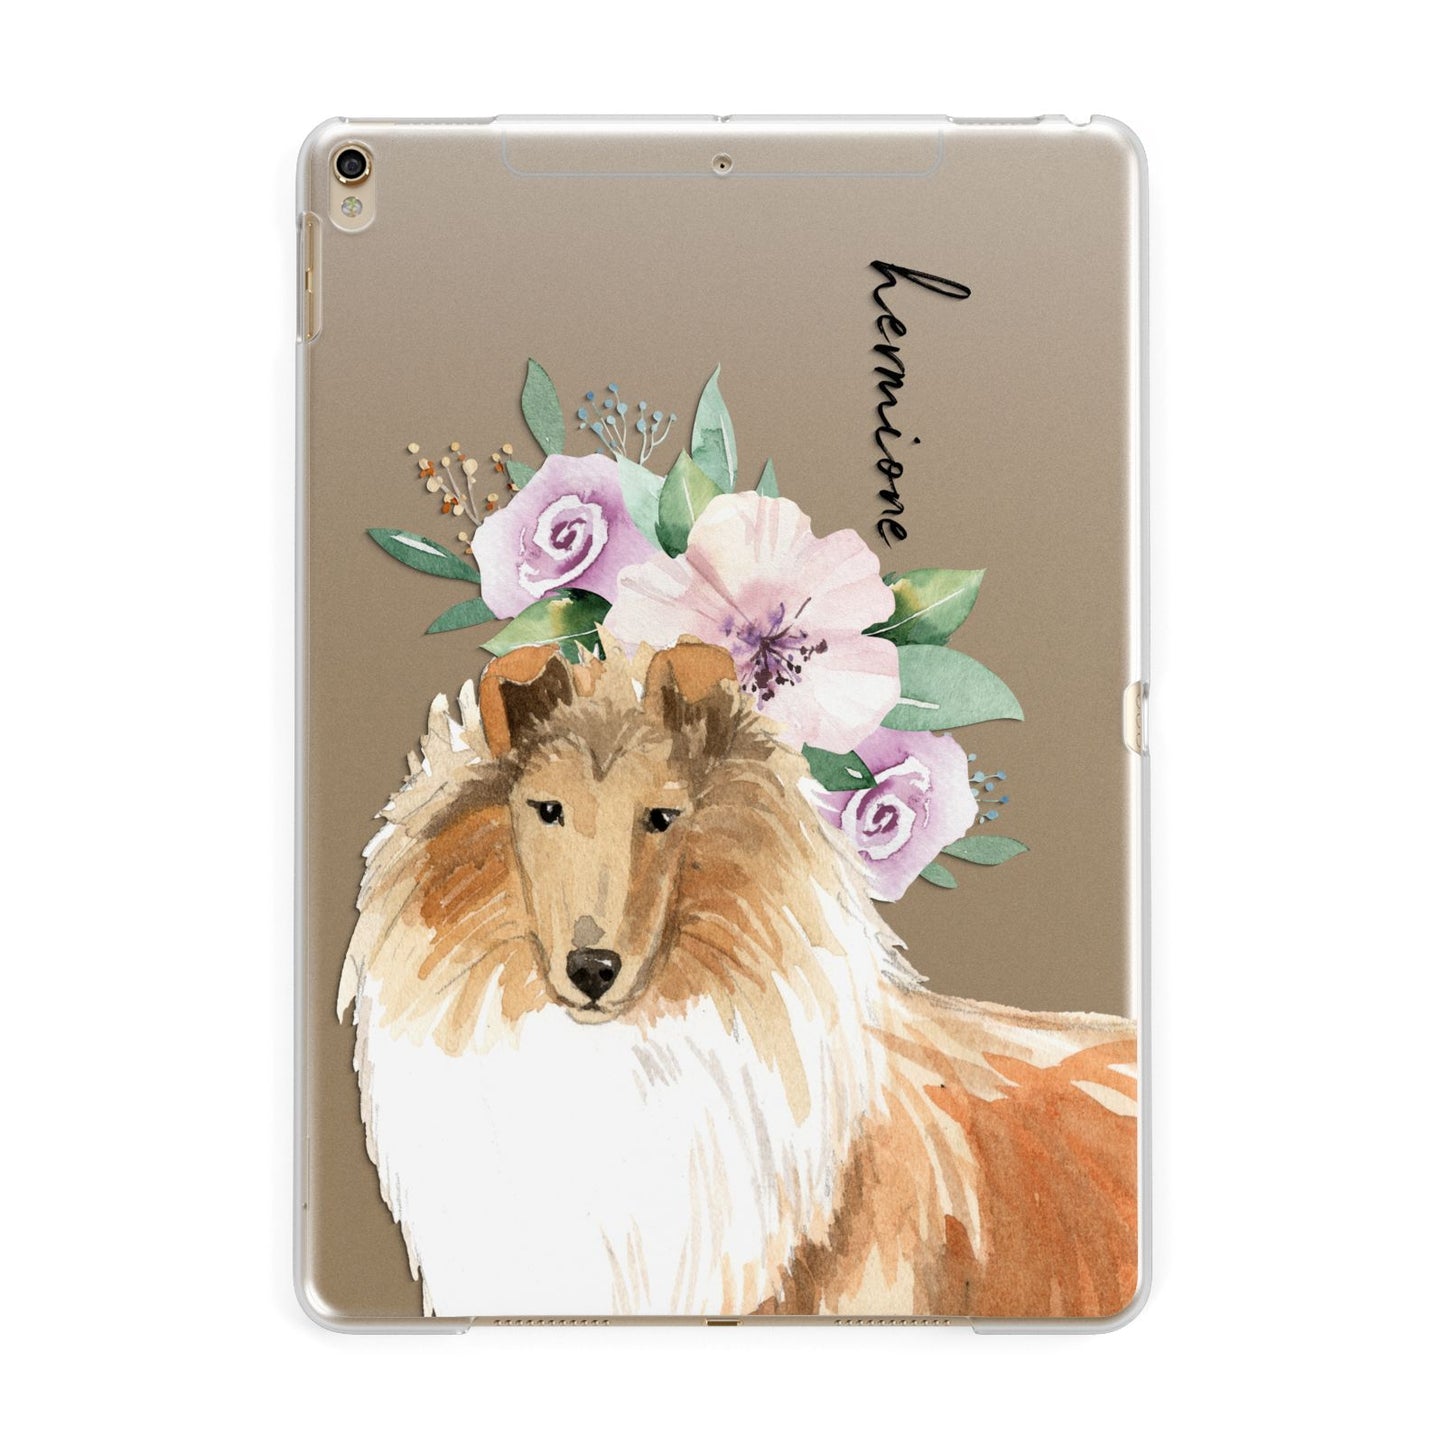 Personalised Rough Collie Apple iPad Gold Case